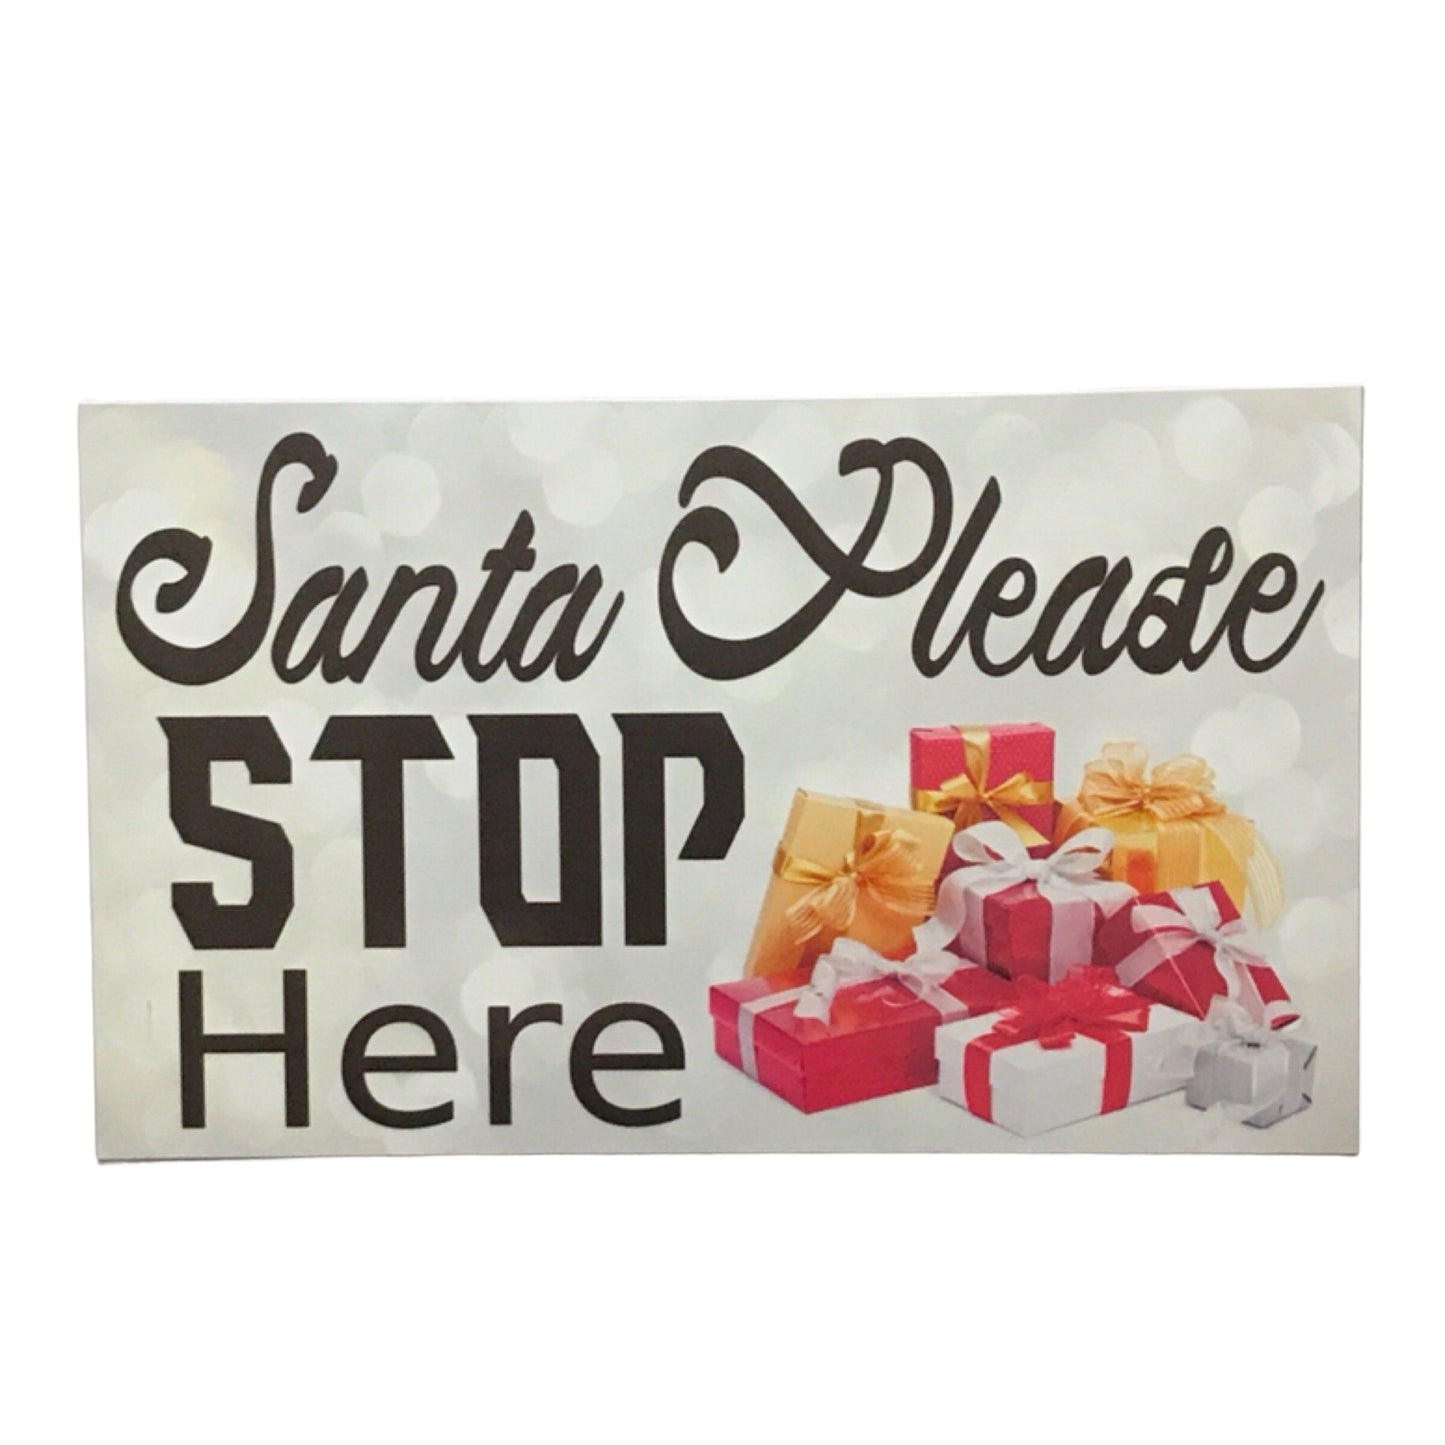 Santa Stop Here Please Christmas Sign - The Renmy Store Homewares & Gifts 